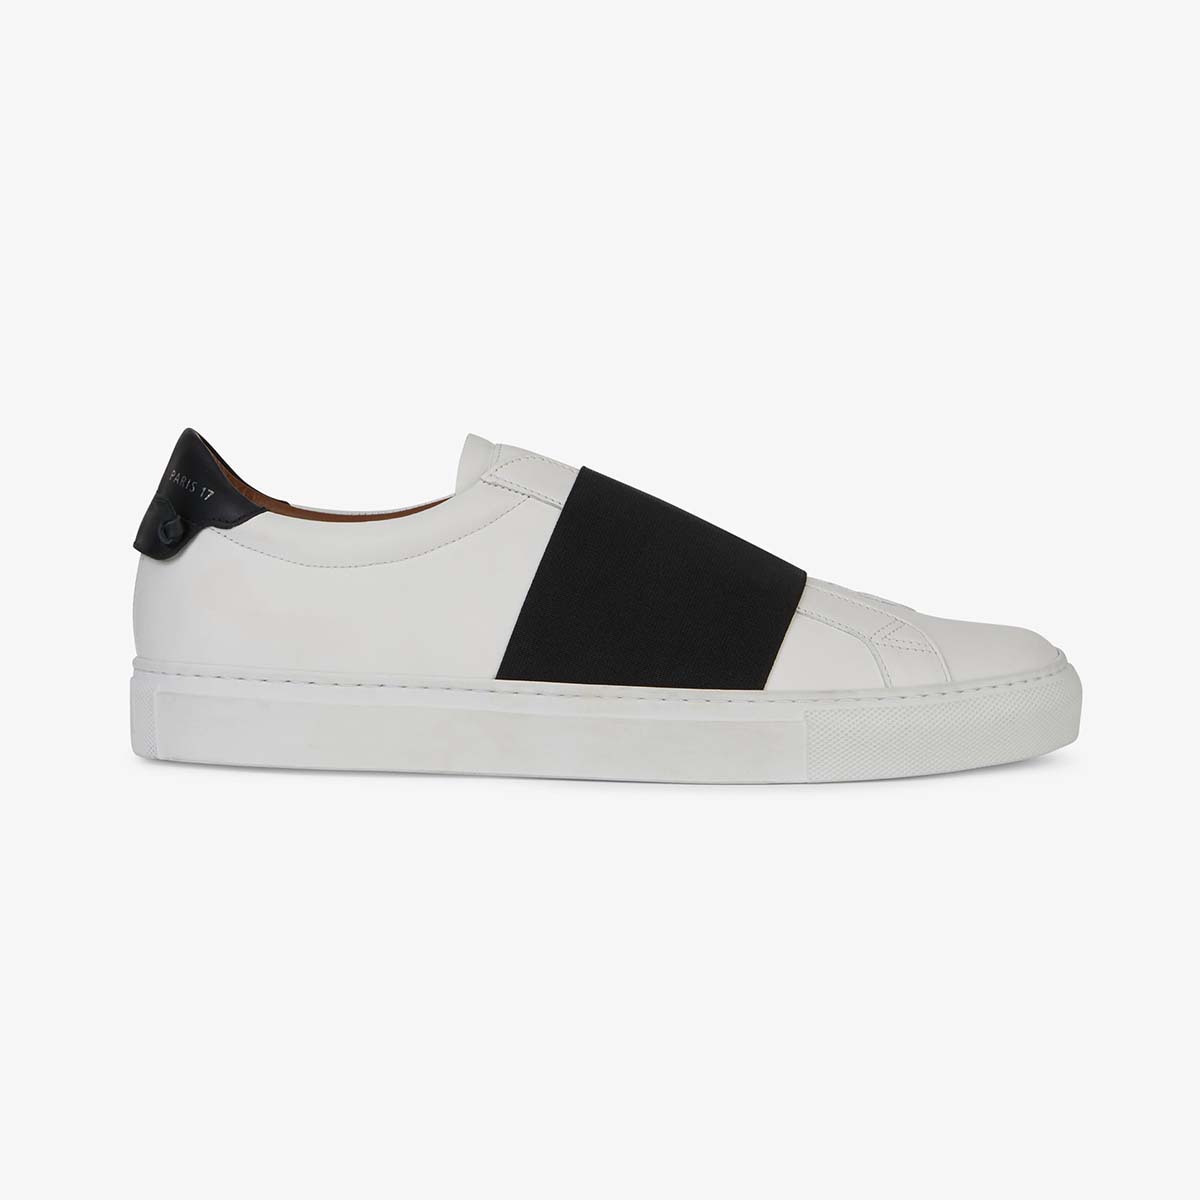 Givenchy Unisex Elastic Strap Sneakers in Leather Shoes White